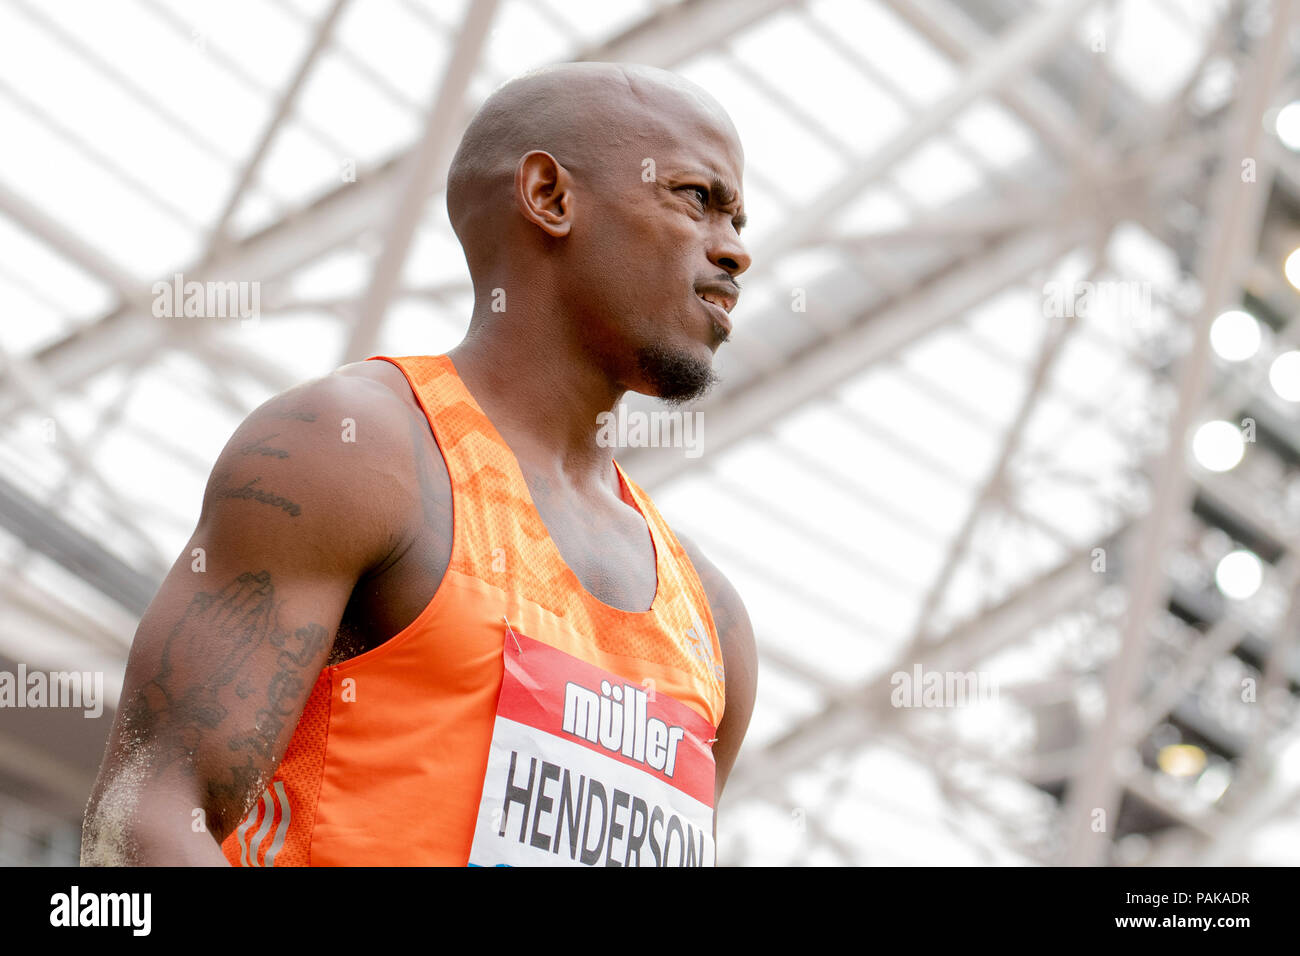 London, UK. 22nd July 2018. Olympic champion Jeff Henderson (USA) finished 5th (8.20m) in the long jump at the Muller Anniversary Games at the London Stadium, London, Great Britiain, on 22 July 2018. Credit: Andrew Peat/Alamy Live News Stock Photo